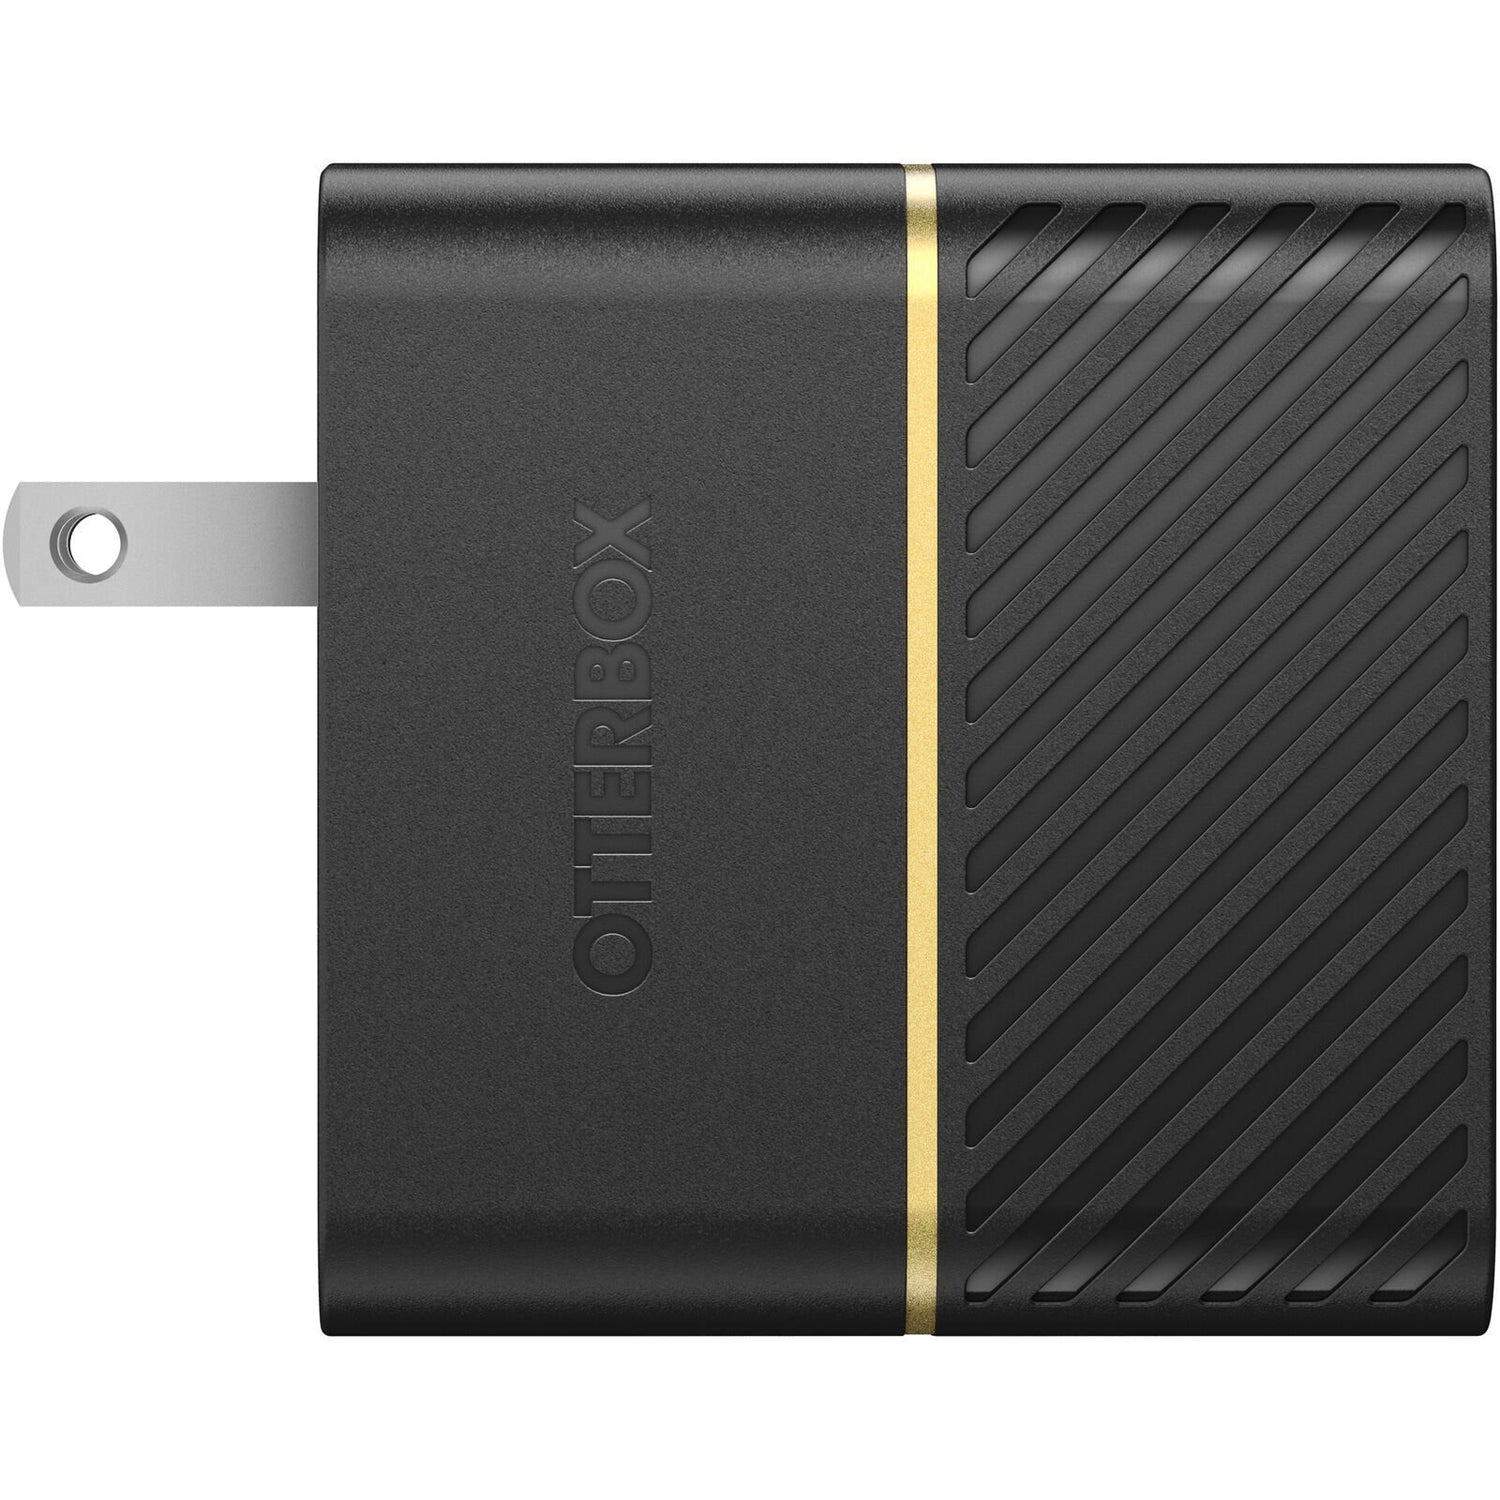 OtterBox USB-C Dual Port Wall Charger 50W Combined - Black Shimmer (New)